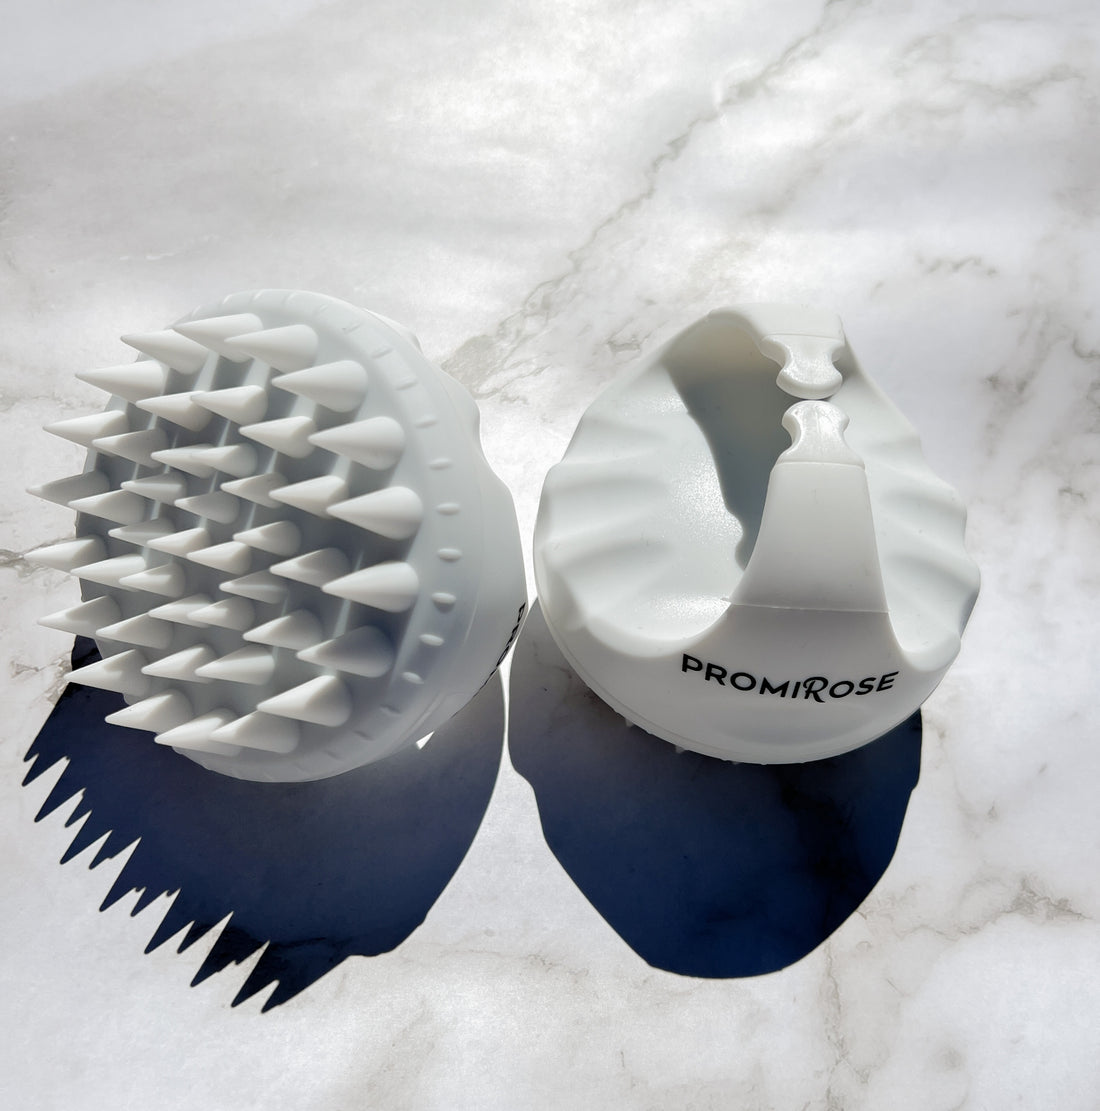 What are the benefits of promirose scalp brush?